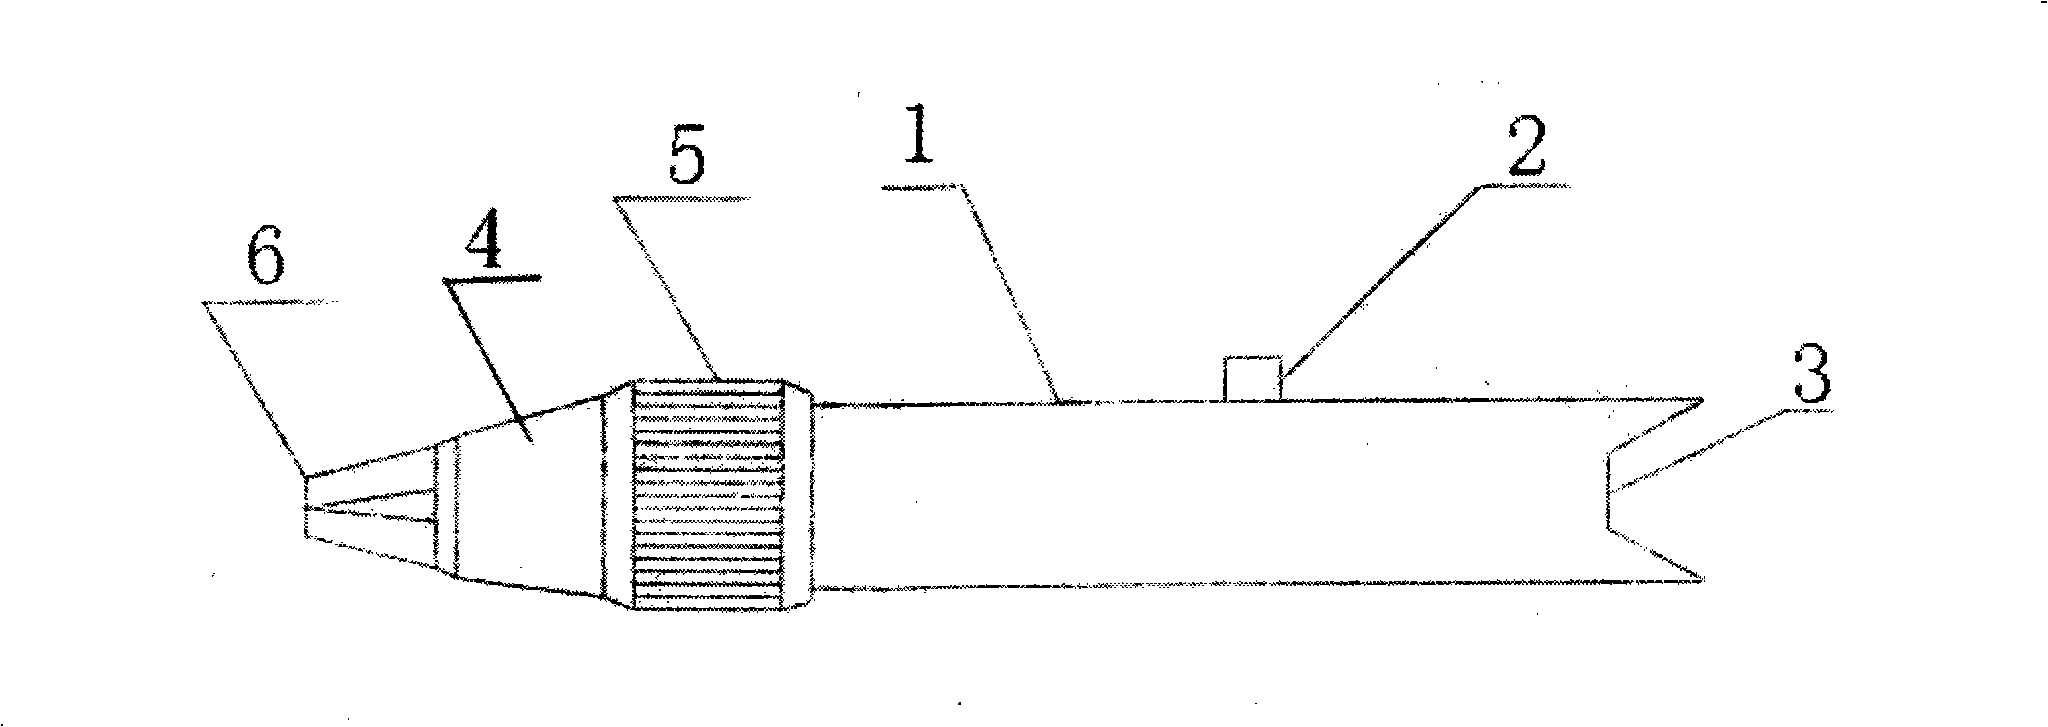 Adjustable clamping device for processing gem